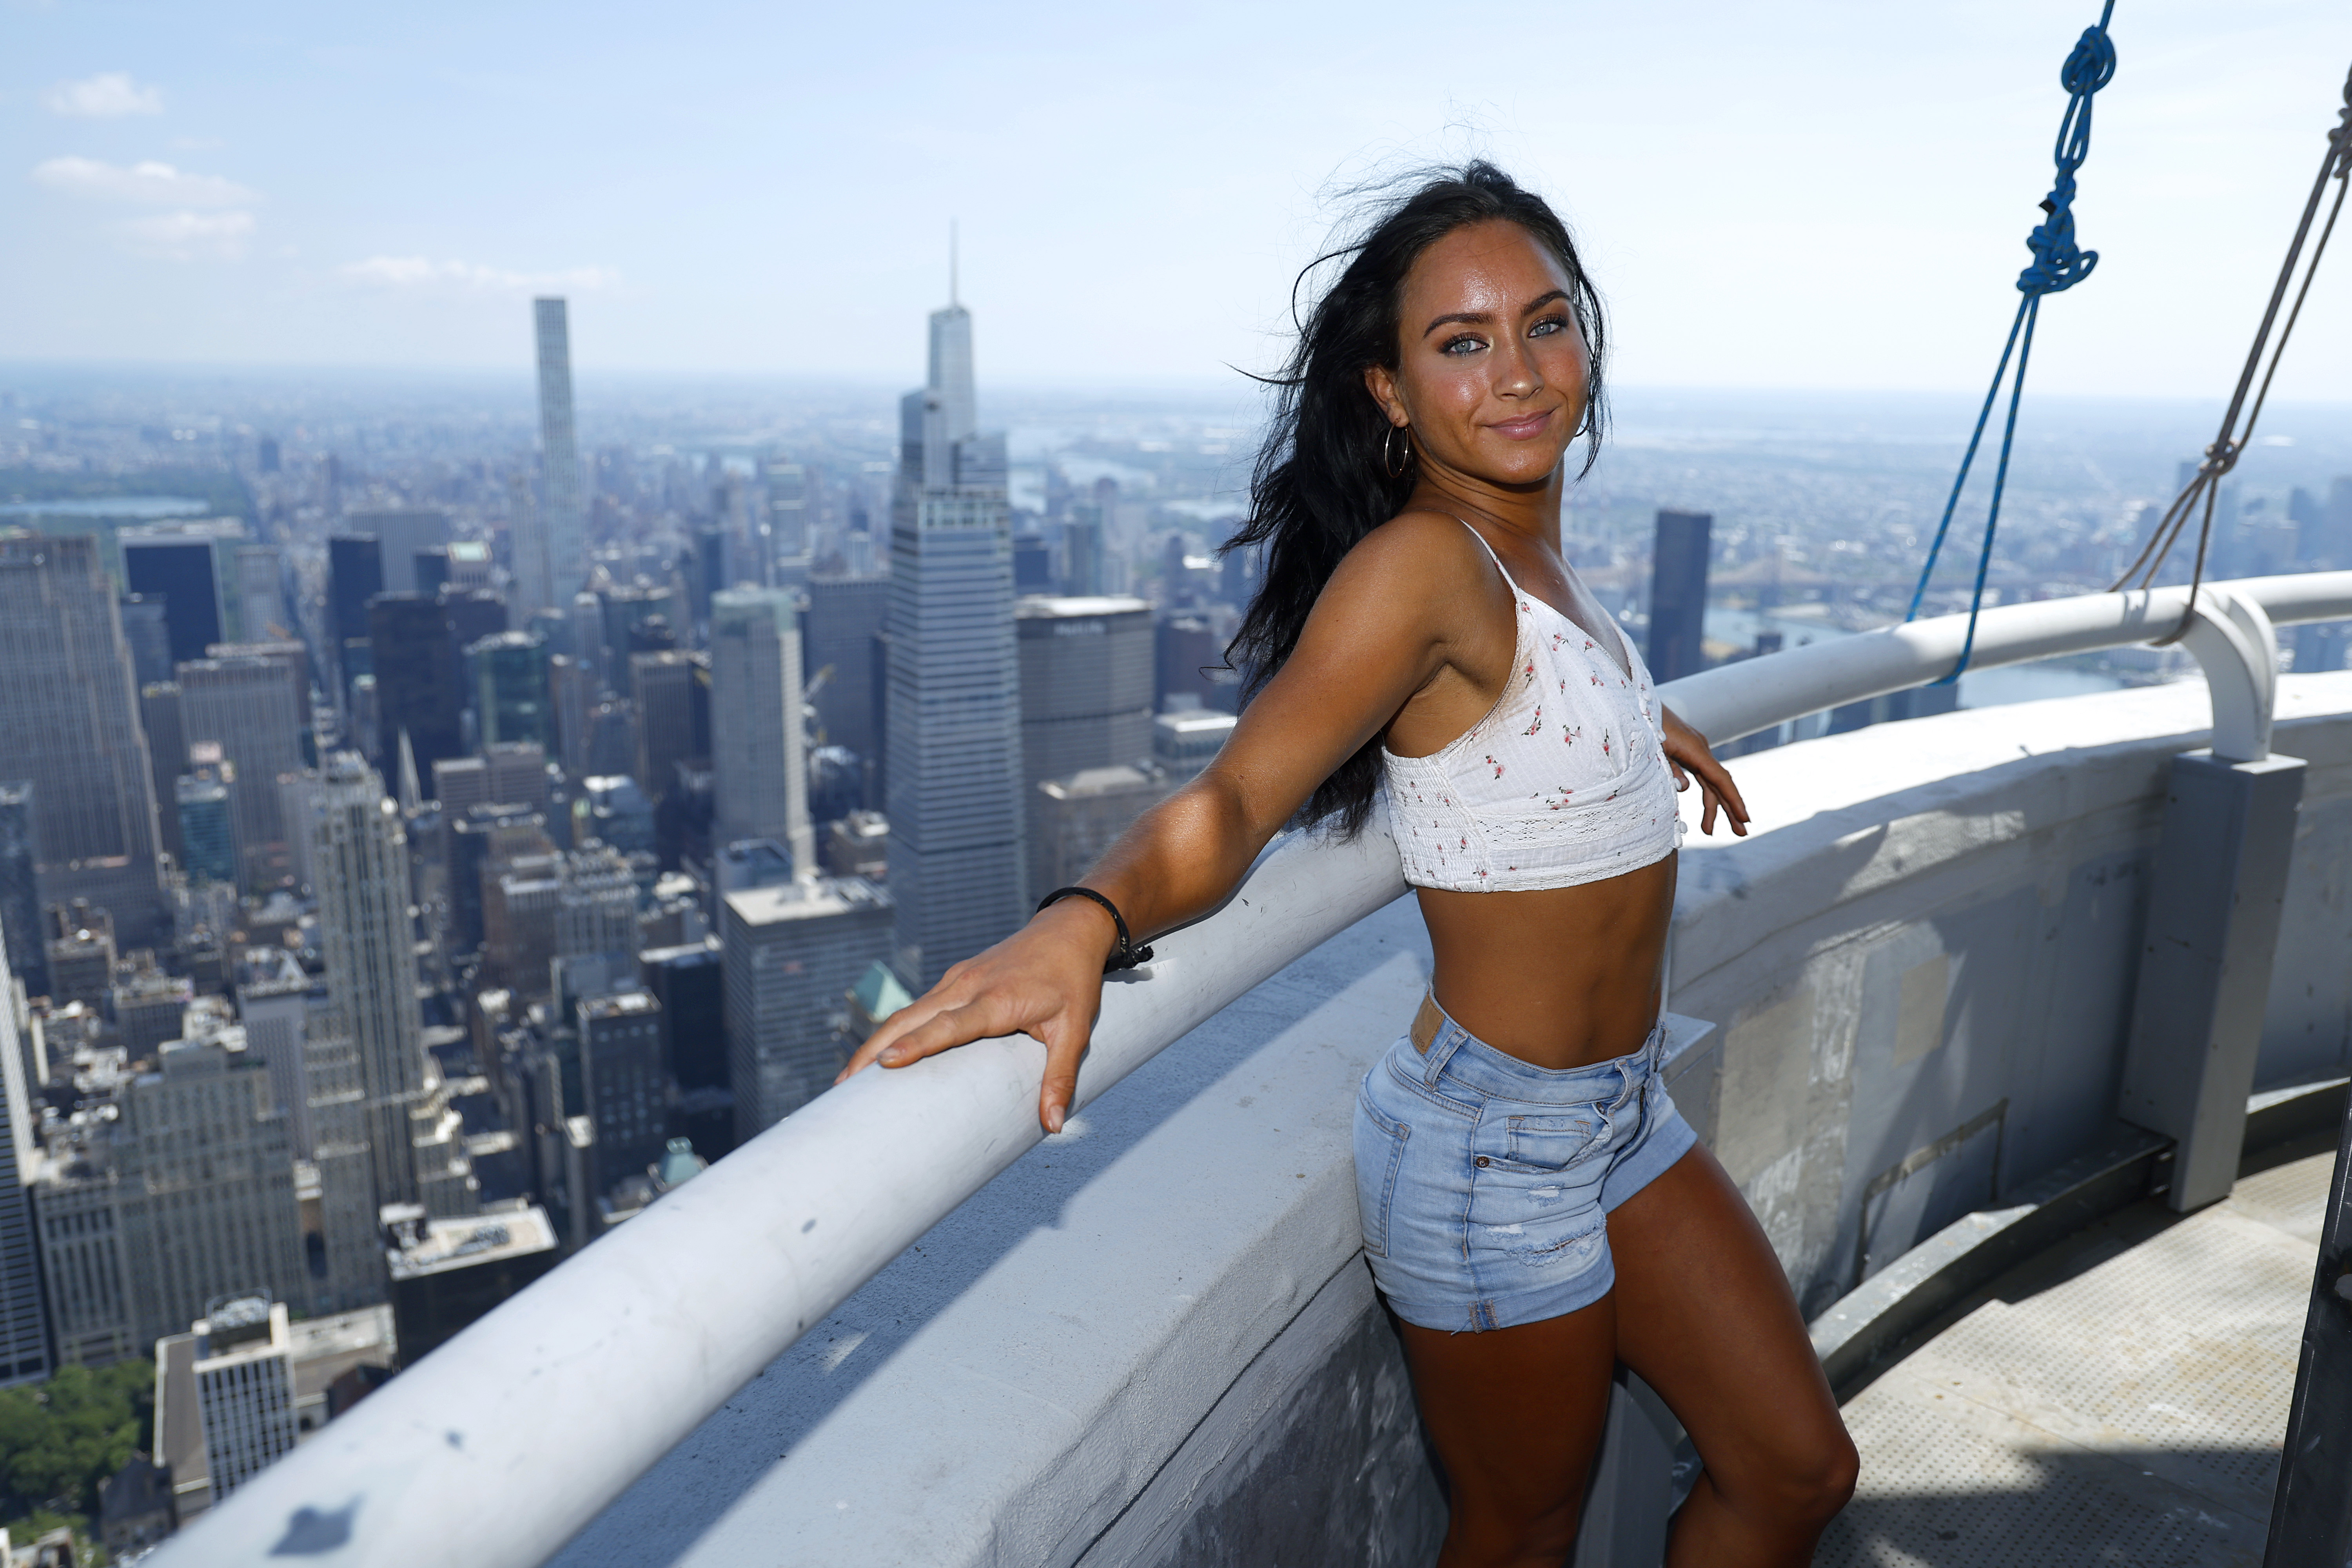 Gabi Butler of the Netflix Documentary "Cheer" visits the Empire State Building on July 9, 2022, in New York City. | Source: Getty Images